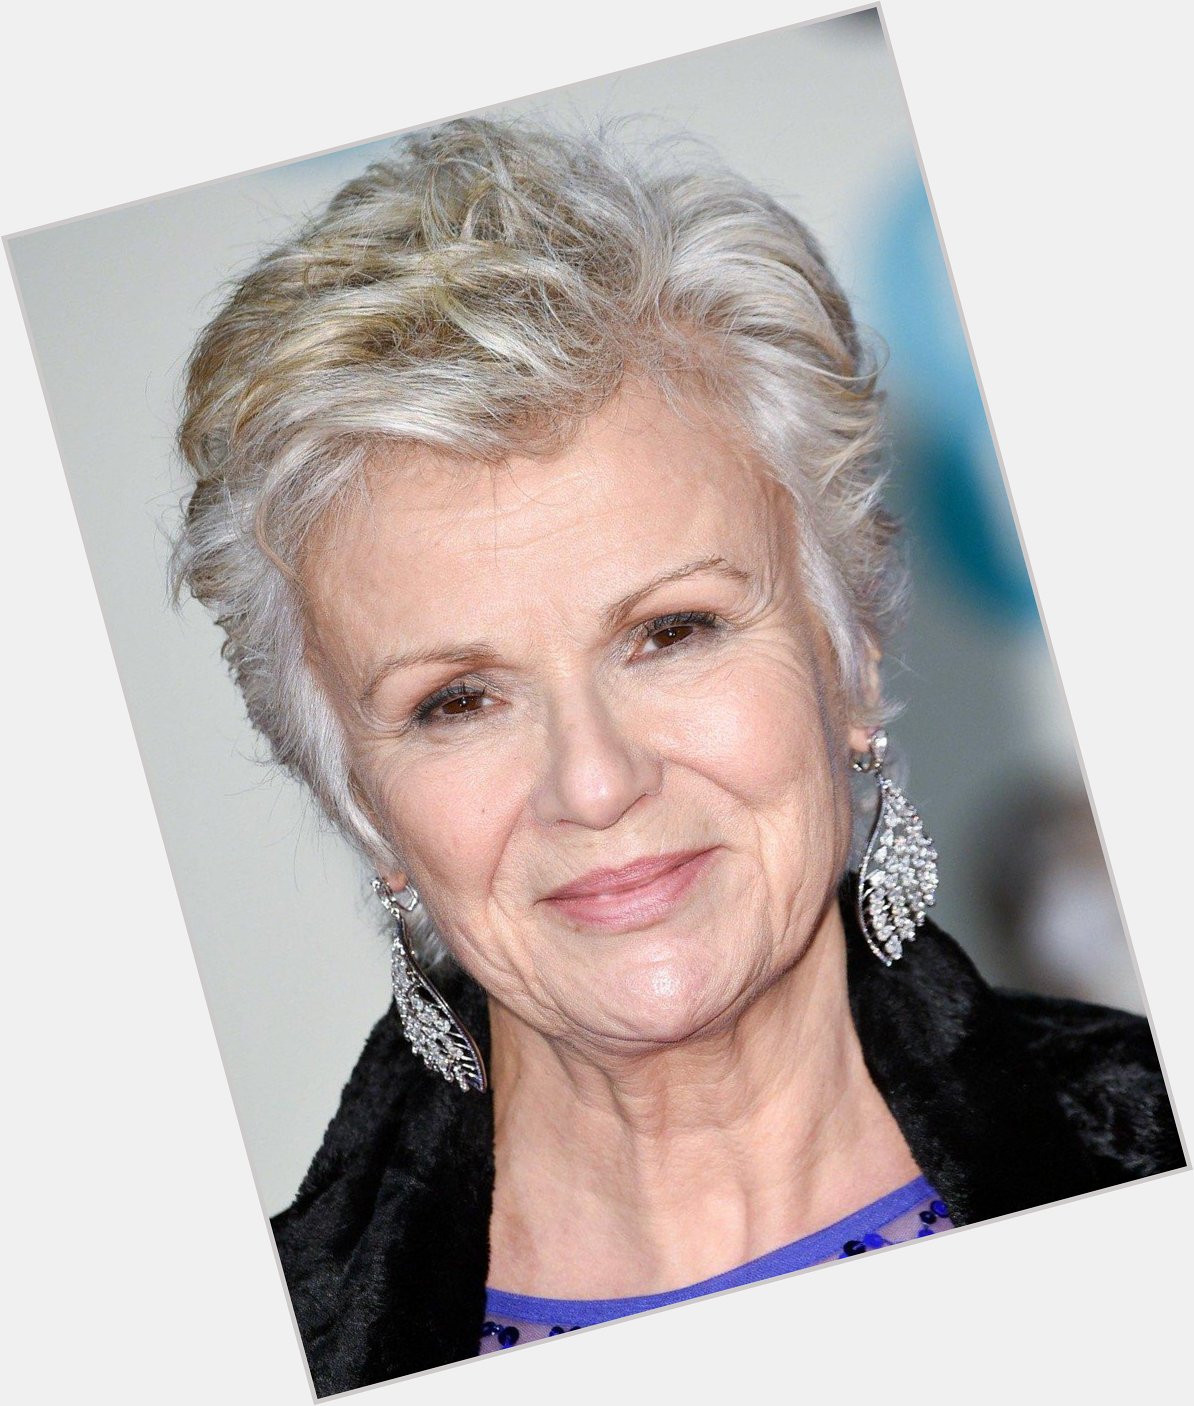 Happy Birthday Julie Walters who played Molly Weasley in Harry Potter   